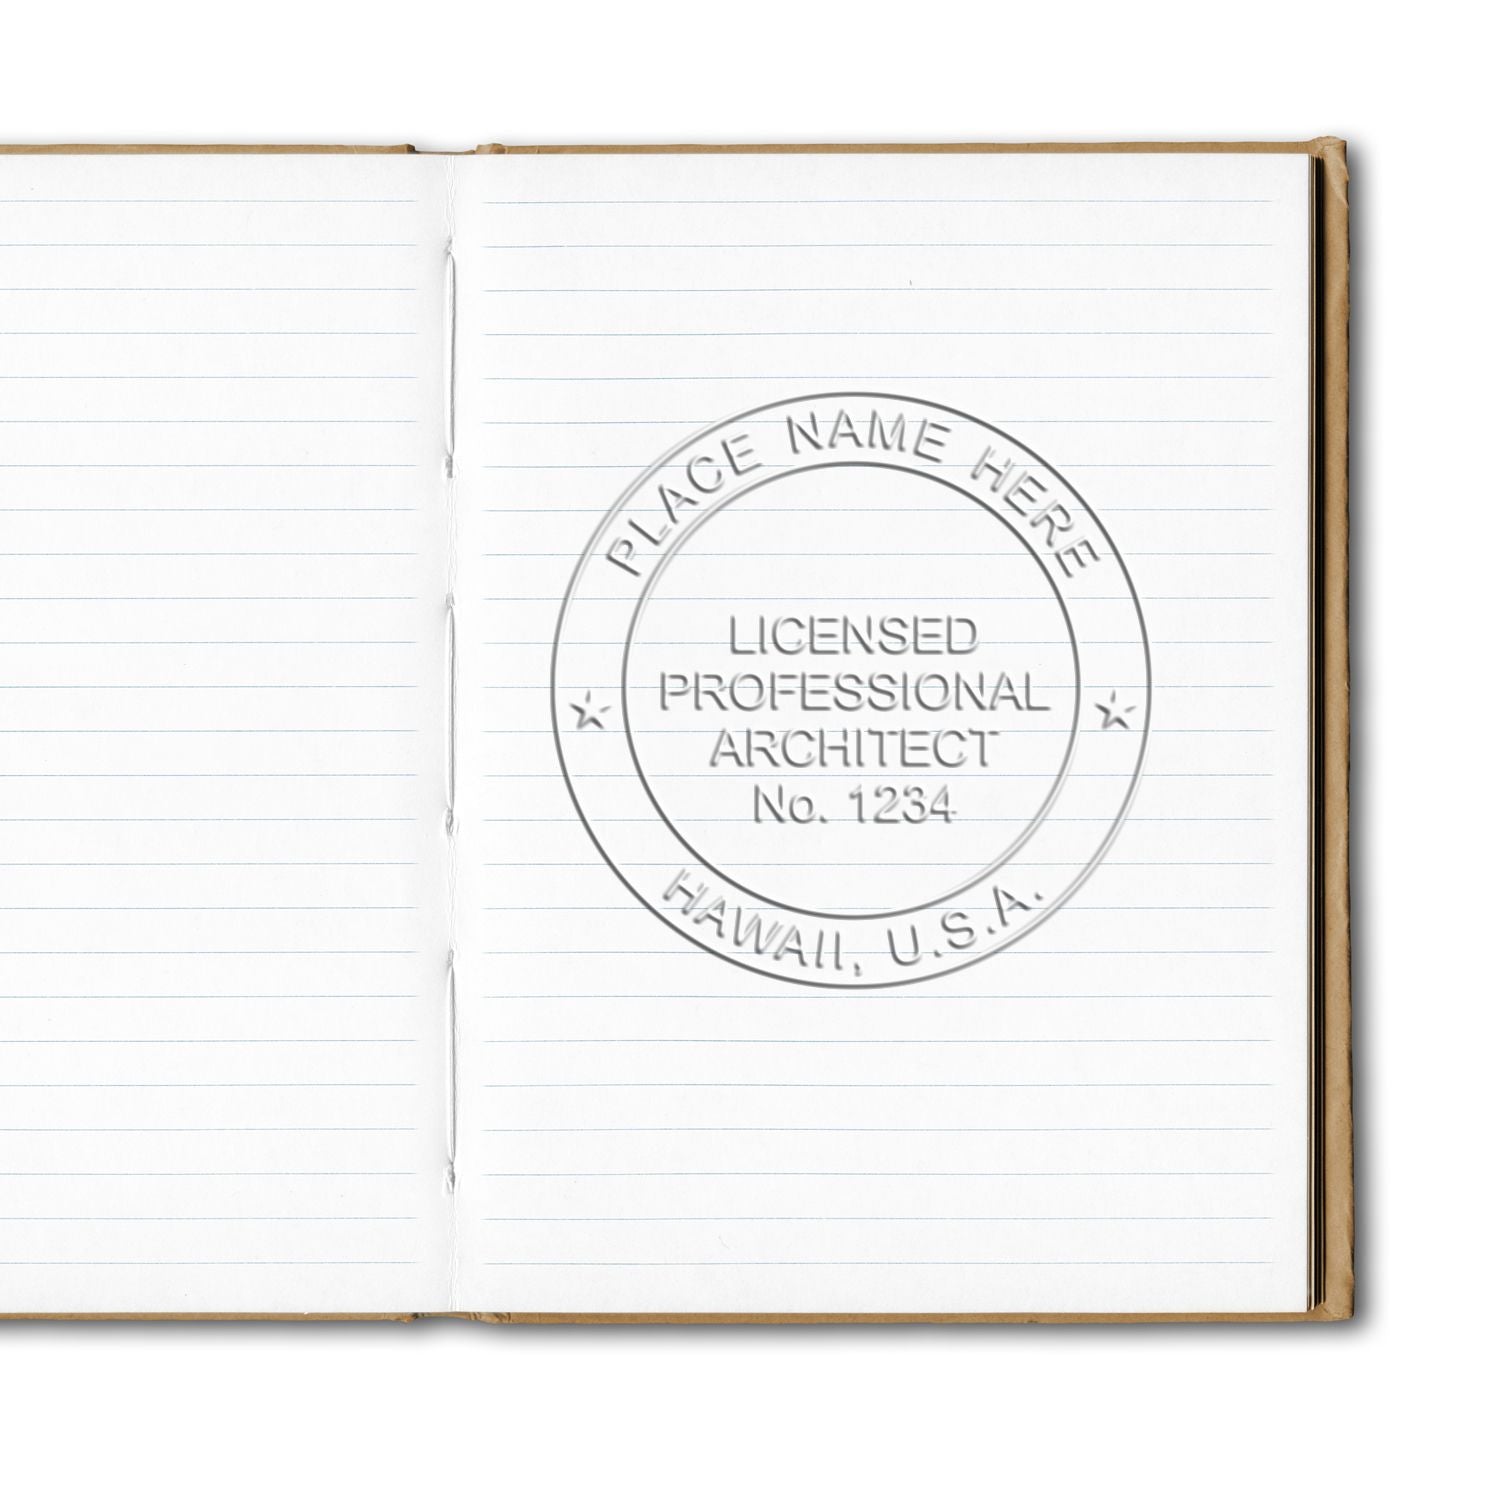 This paper is stamped with a sample imprint of the Handheld Hawaii Architect Seal Embosser, signifying its quality and reliability.